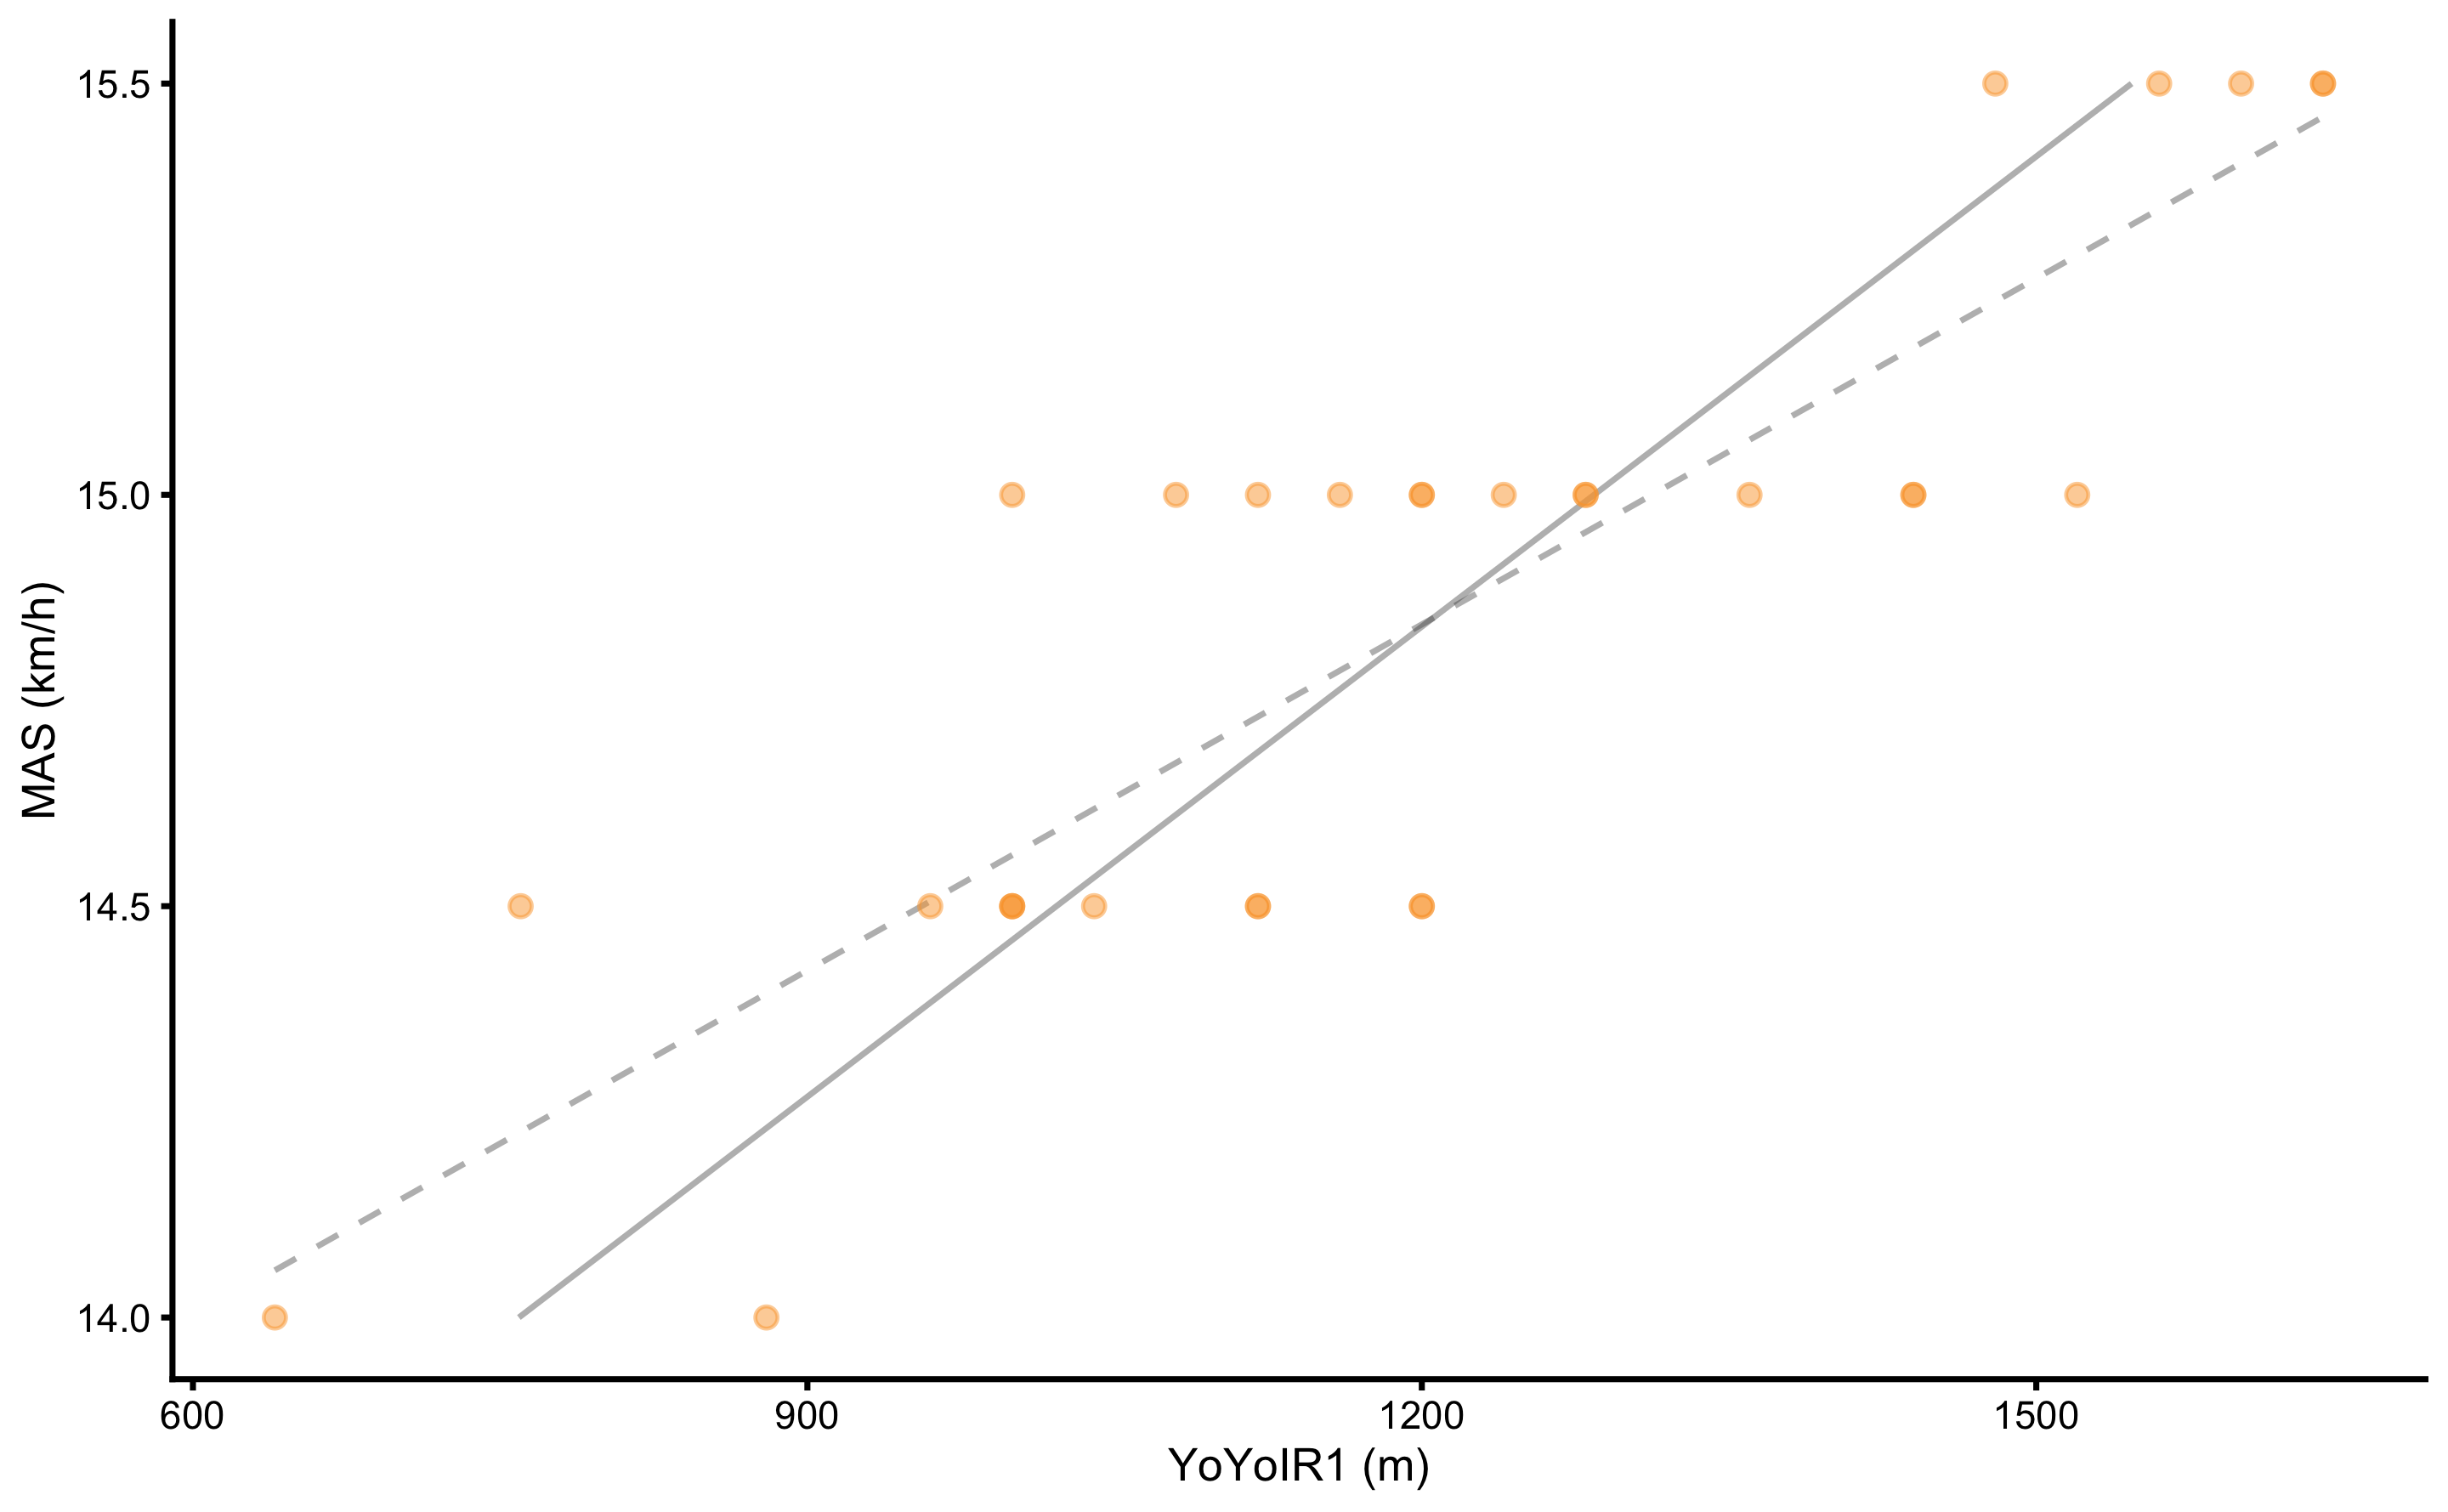 Regression line differs depending which variable is target or the outcome variable. Dashed grey line represents regression line when MAS is the target variable. Grey line represents regression line when YoYoIR1 is the target variable. Since they are not identical, one cannot reverse the equation to predict YoYoIR1 from MAS score, when such equation is estimated by predicting MAS from YoYoIR1